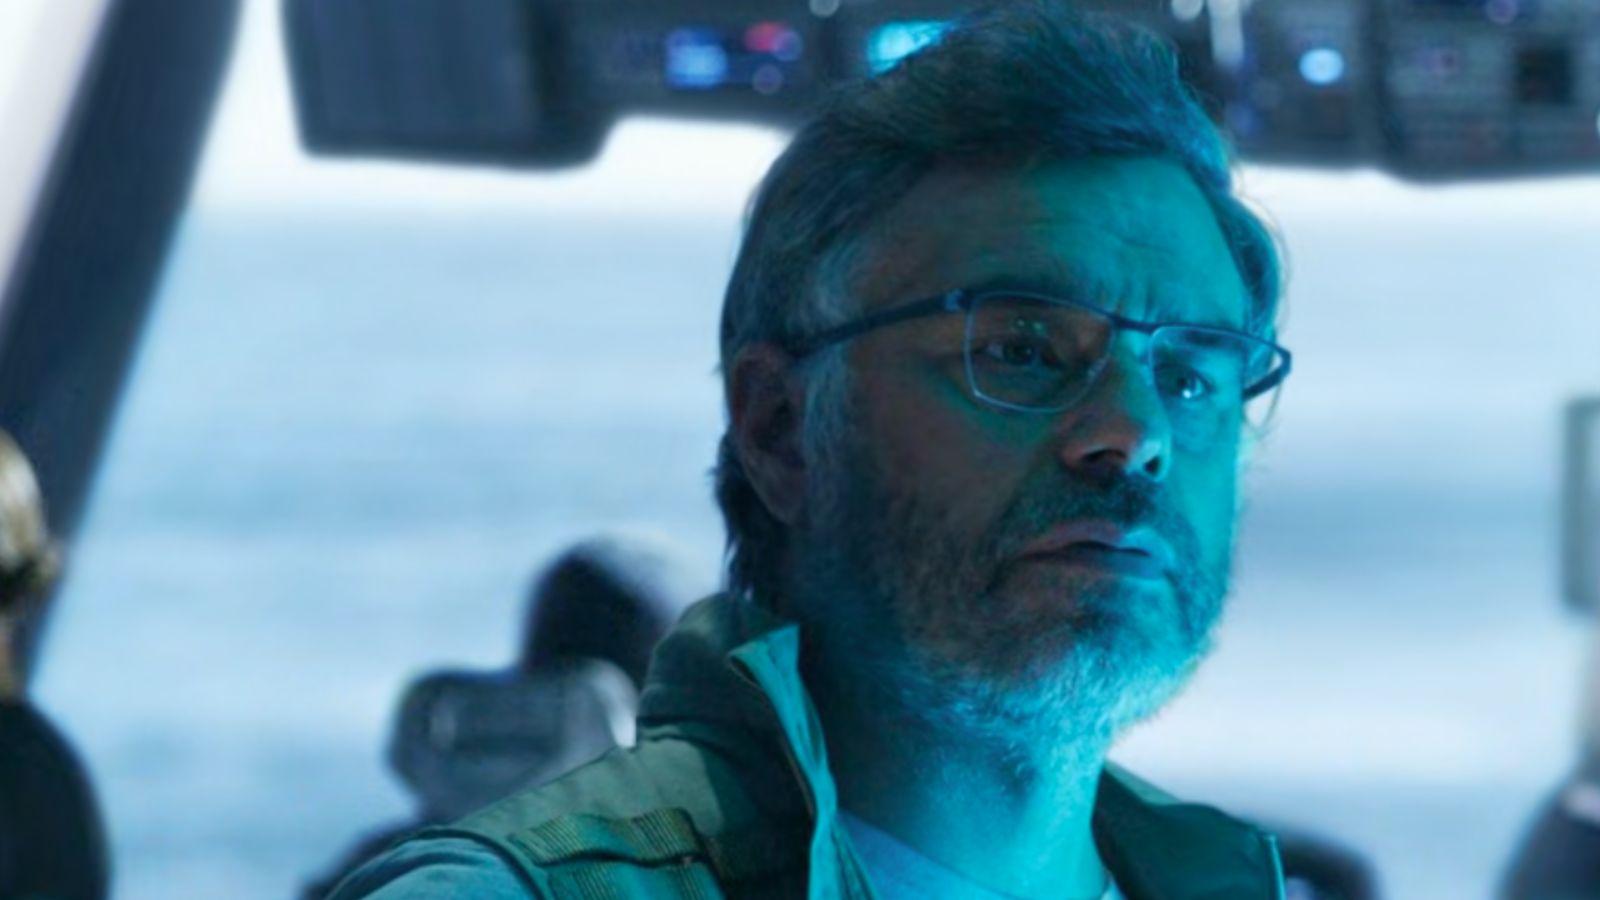 Jemaine Clement as Dr Ian Garvin in Avatar 2.